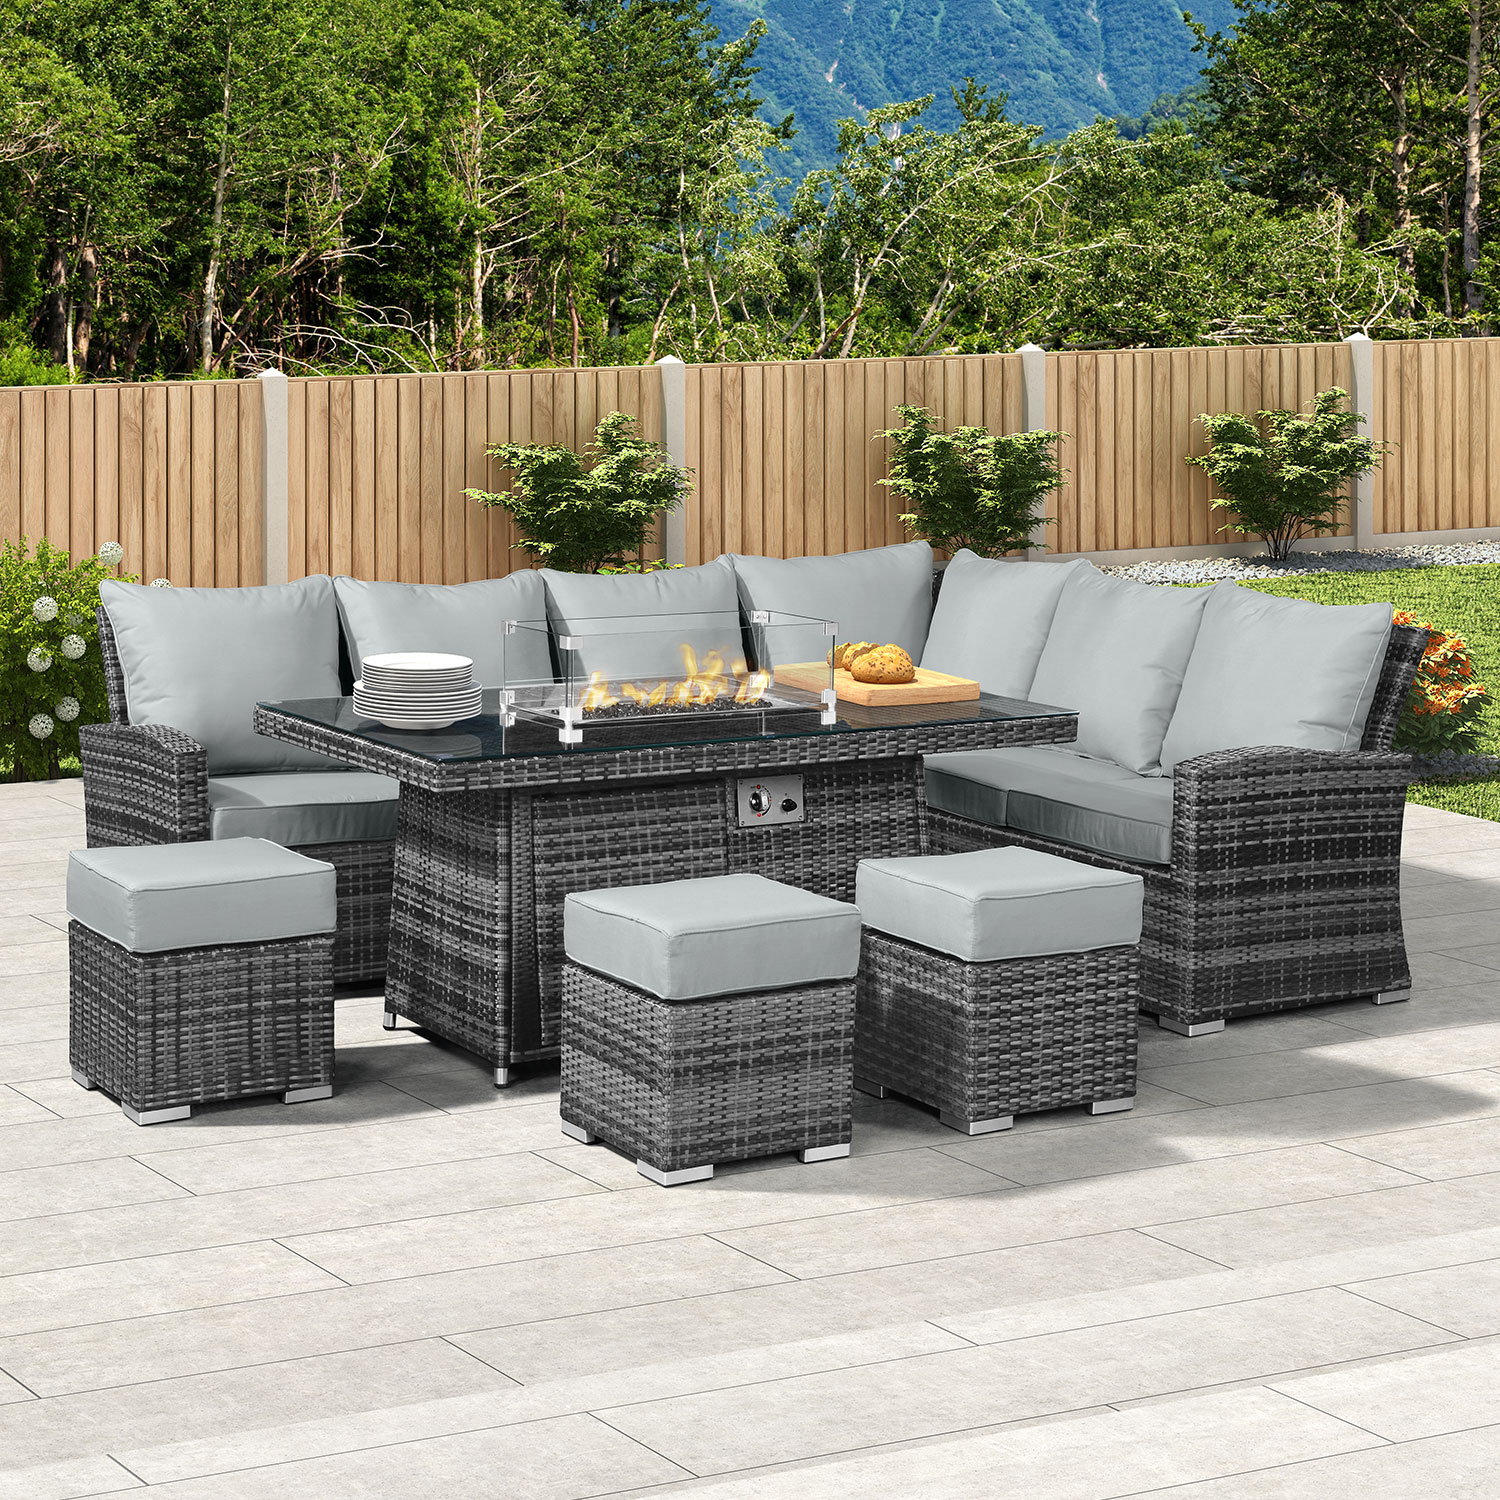 Hand Rattan Corner Sofa Dining Set, Outdoor Fire Pit Tables With Chairs